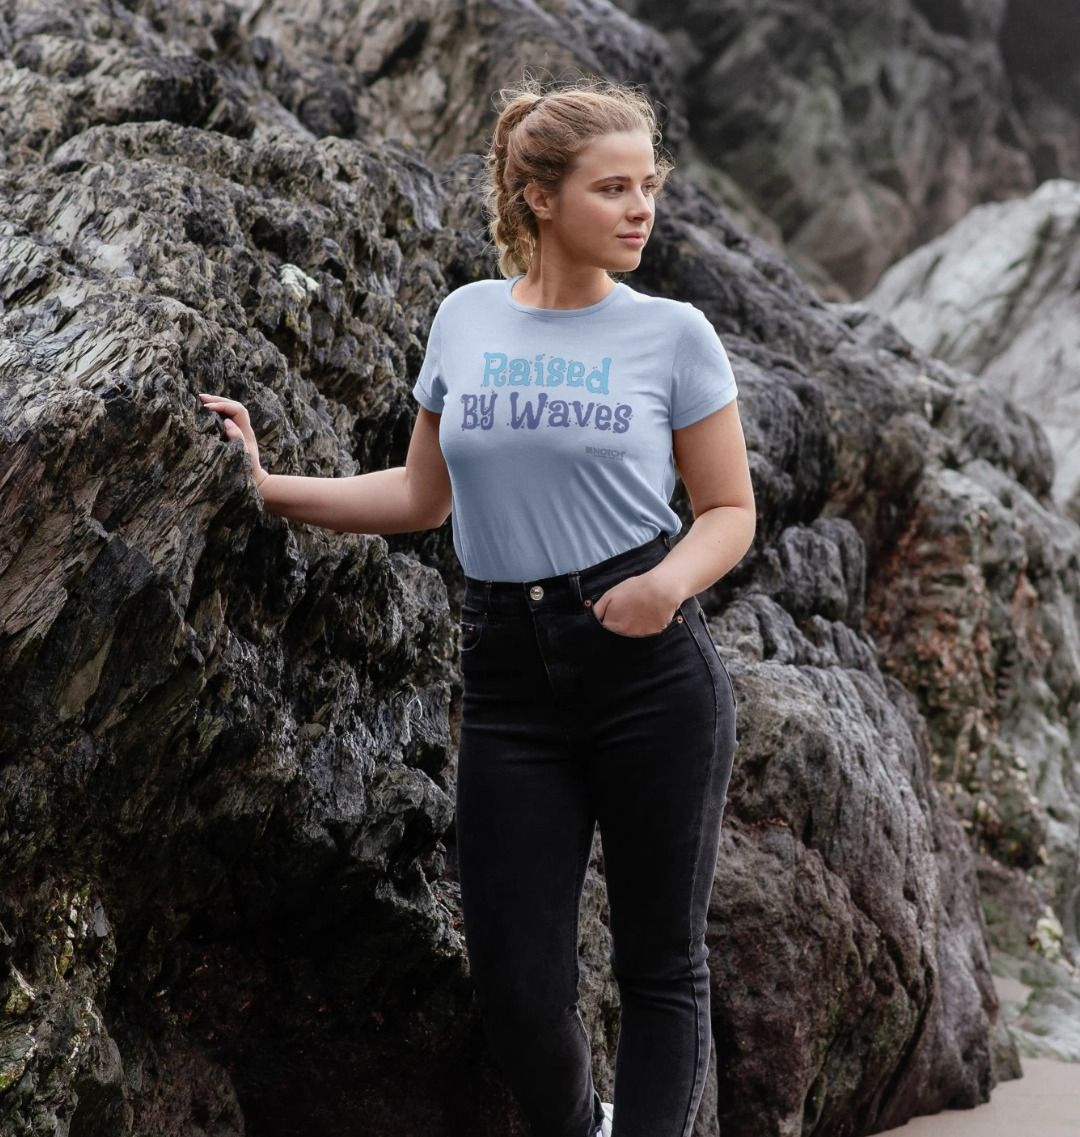 Women's Raised By Waves T-Shirt